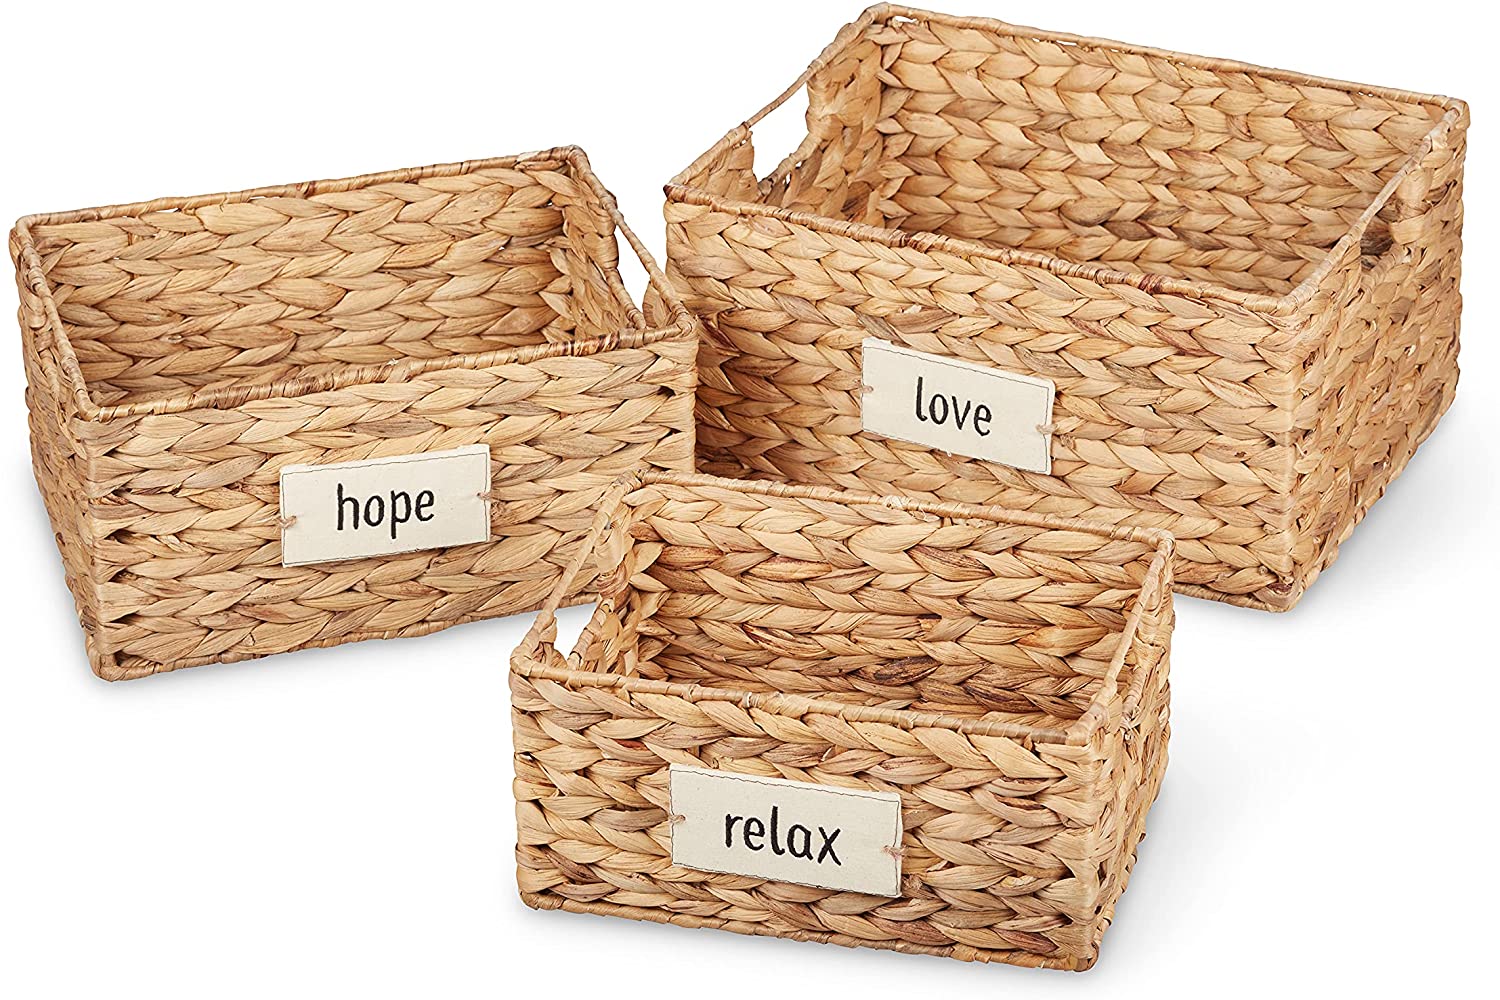 Storage Baskets with Personalized Labels
